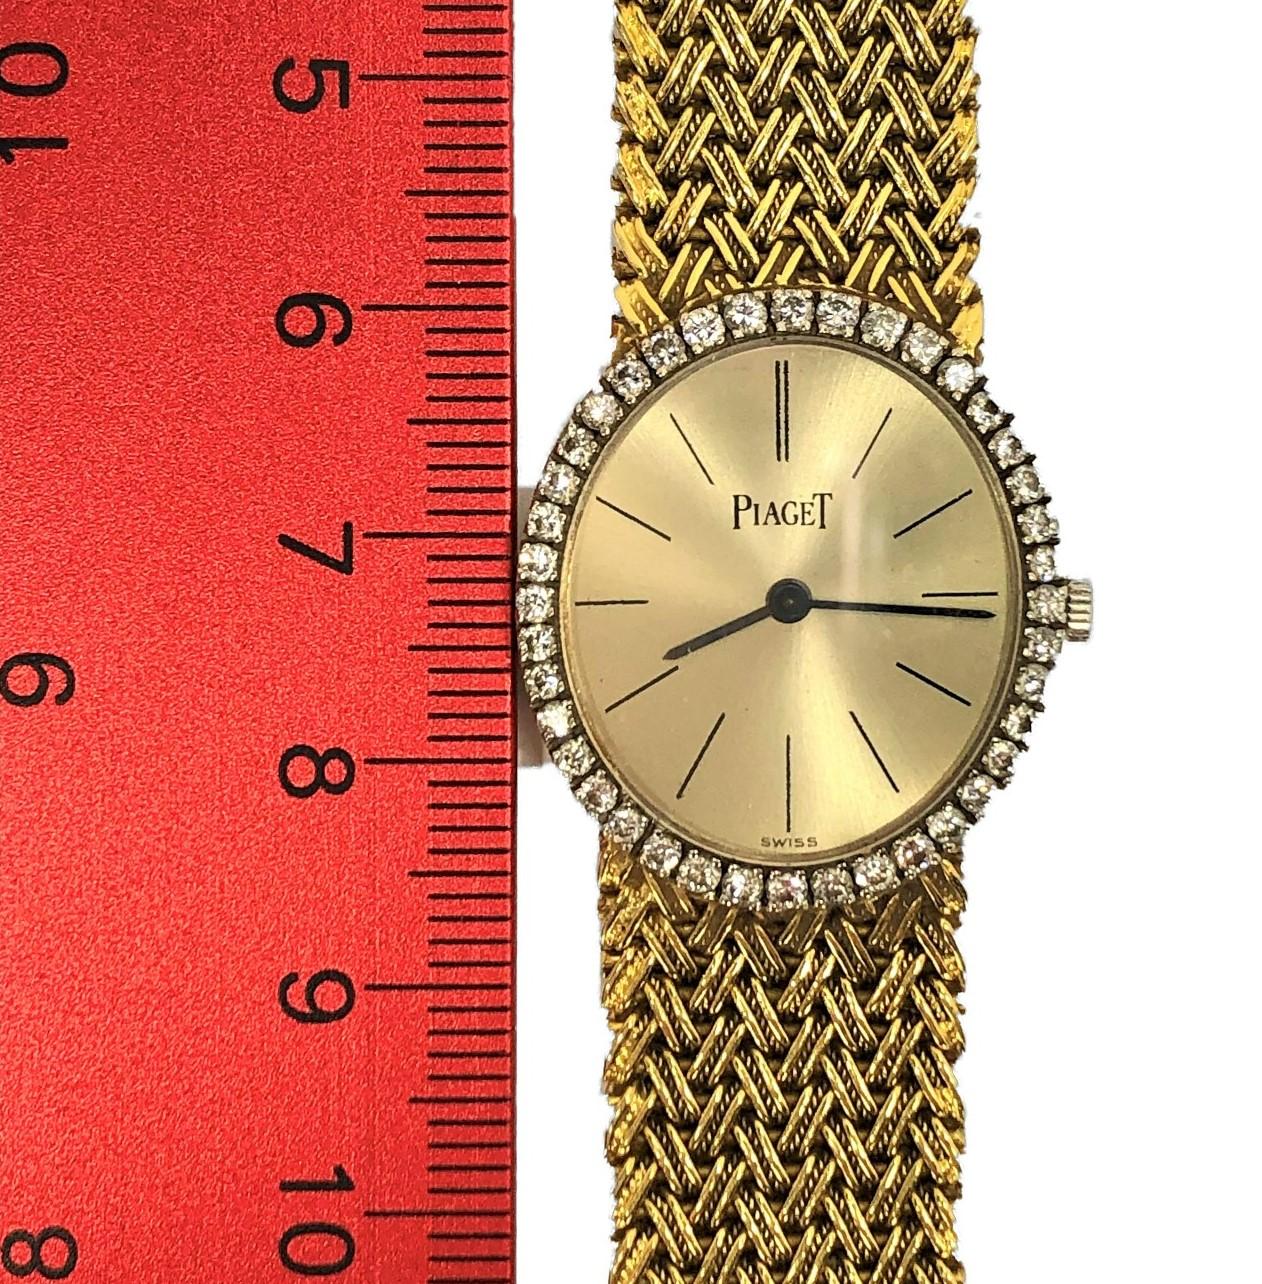 Piaget Ladies Classic Vertical Oval Yellow Gold Watch with Diamond Bezel 1